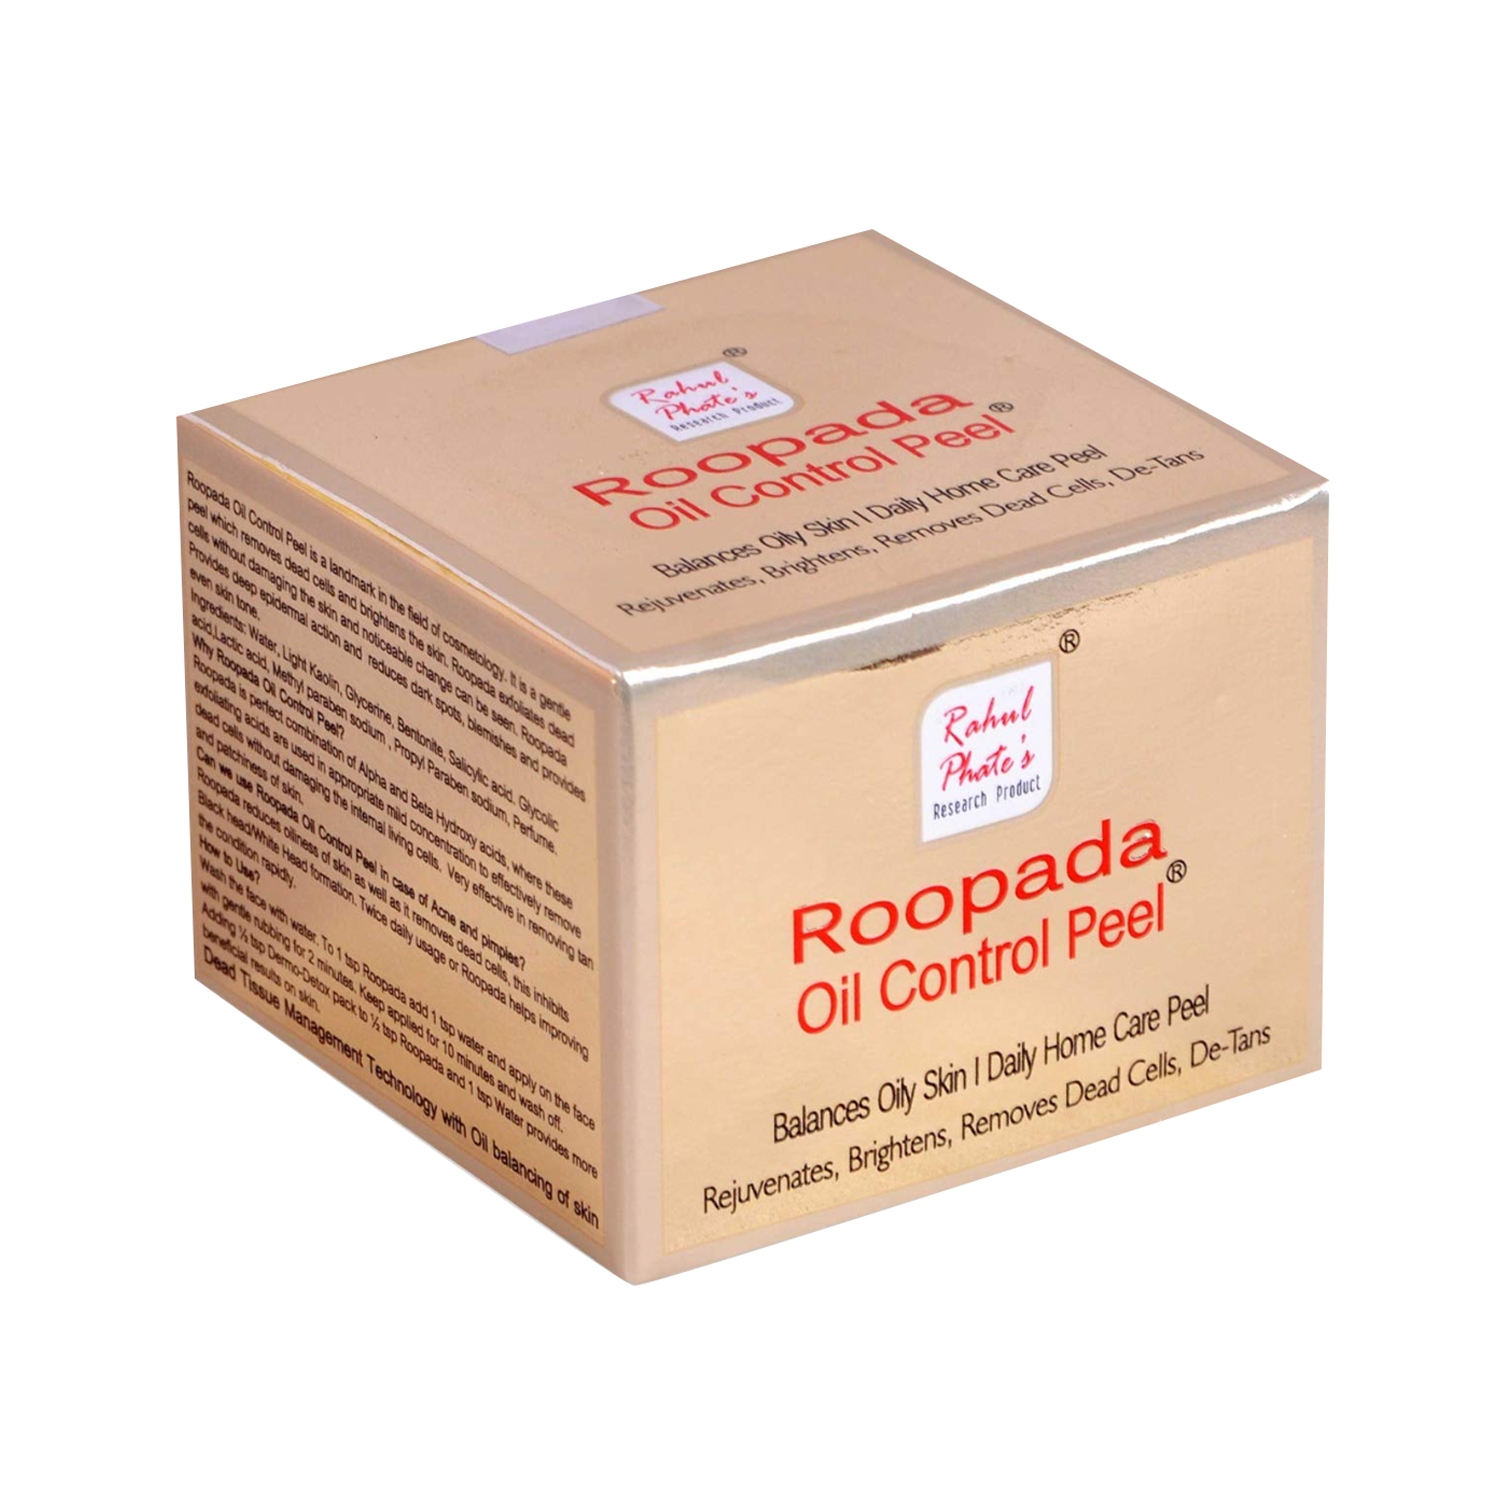 Rahul Phate's Research Product Roopada Oil Control Peel (75g)